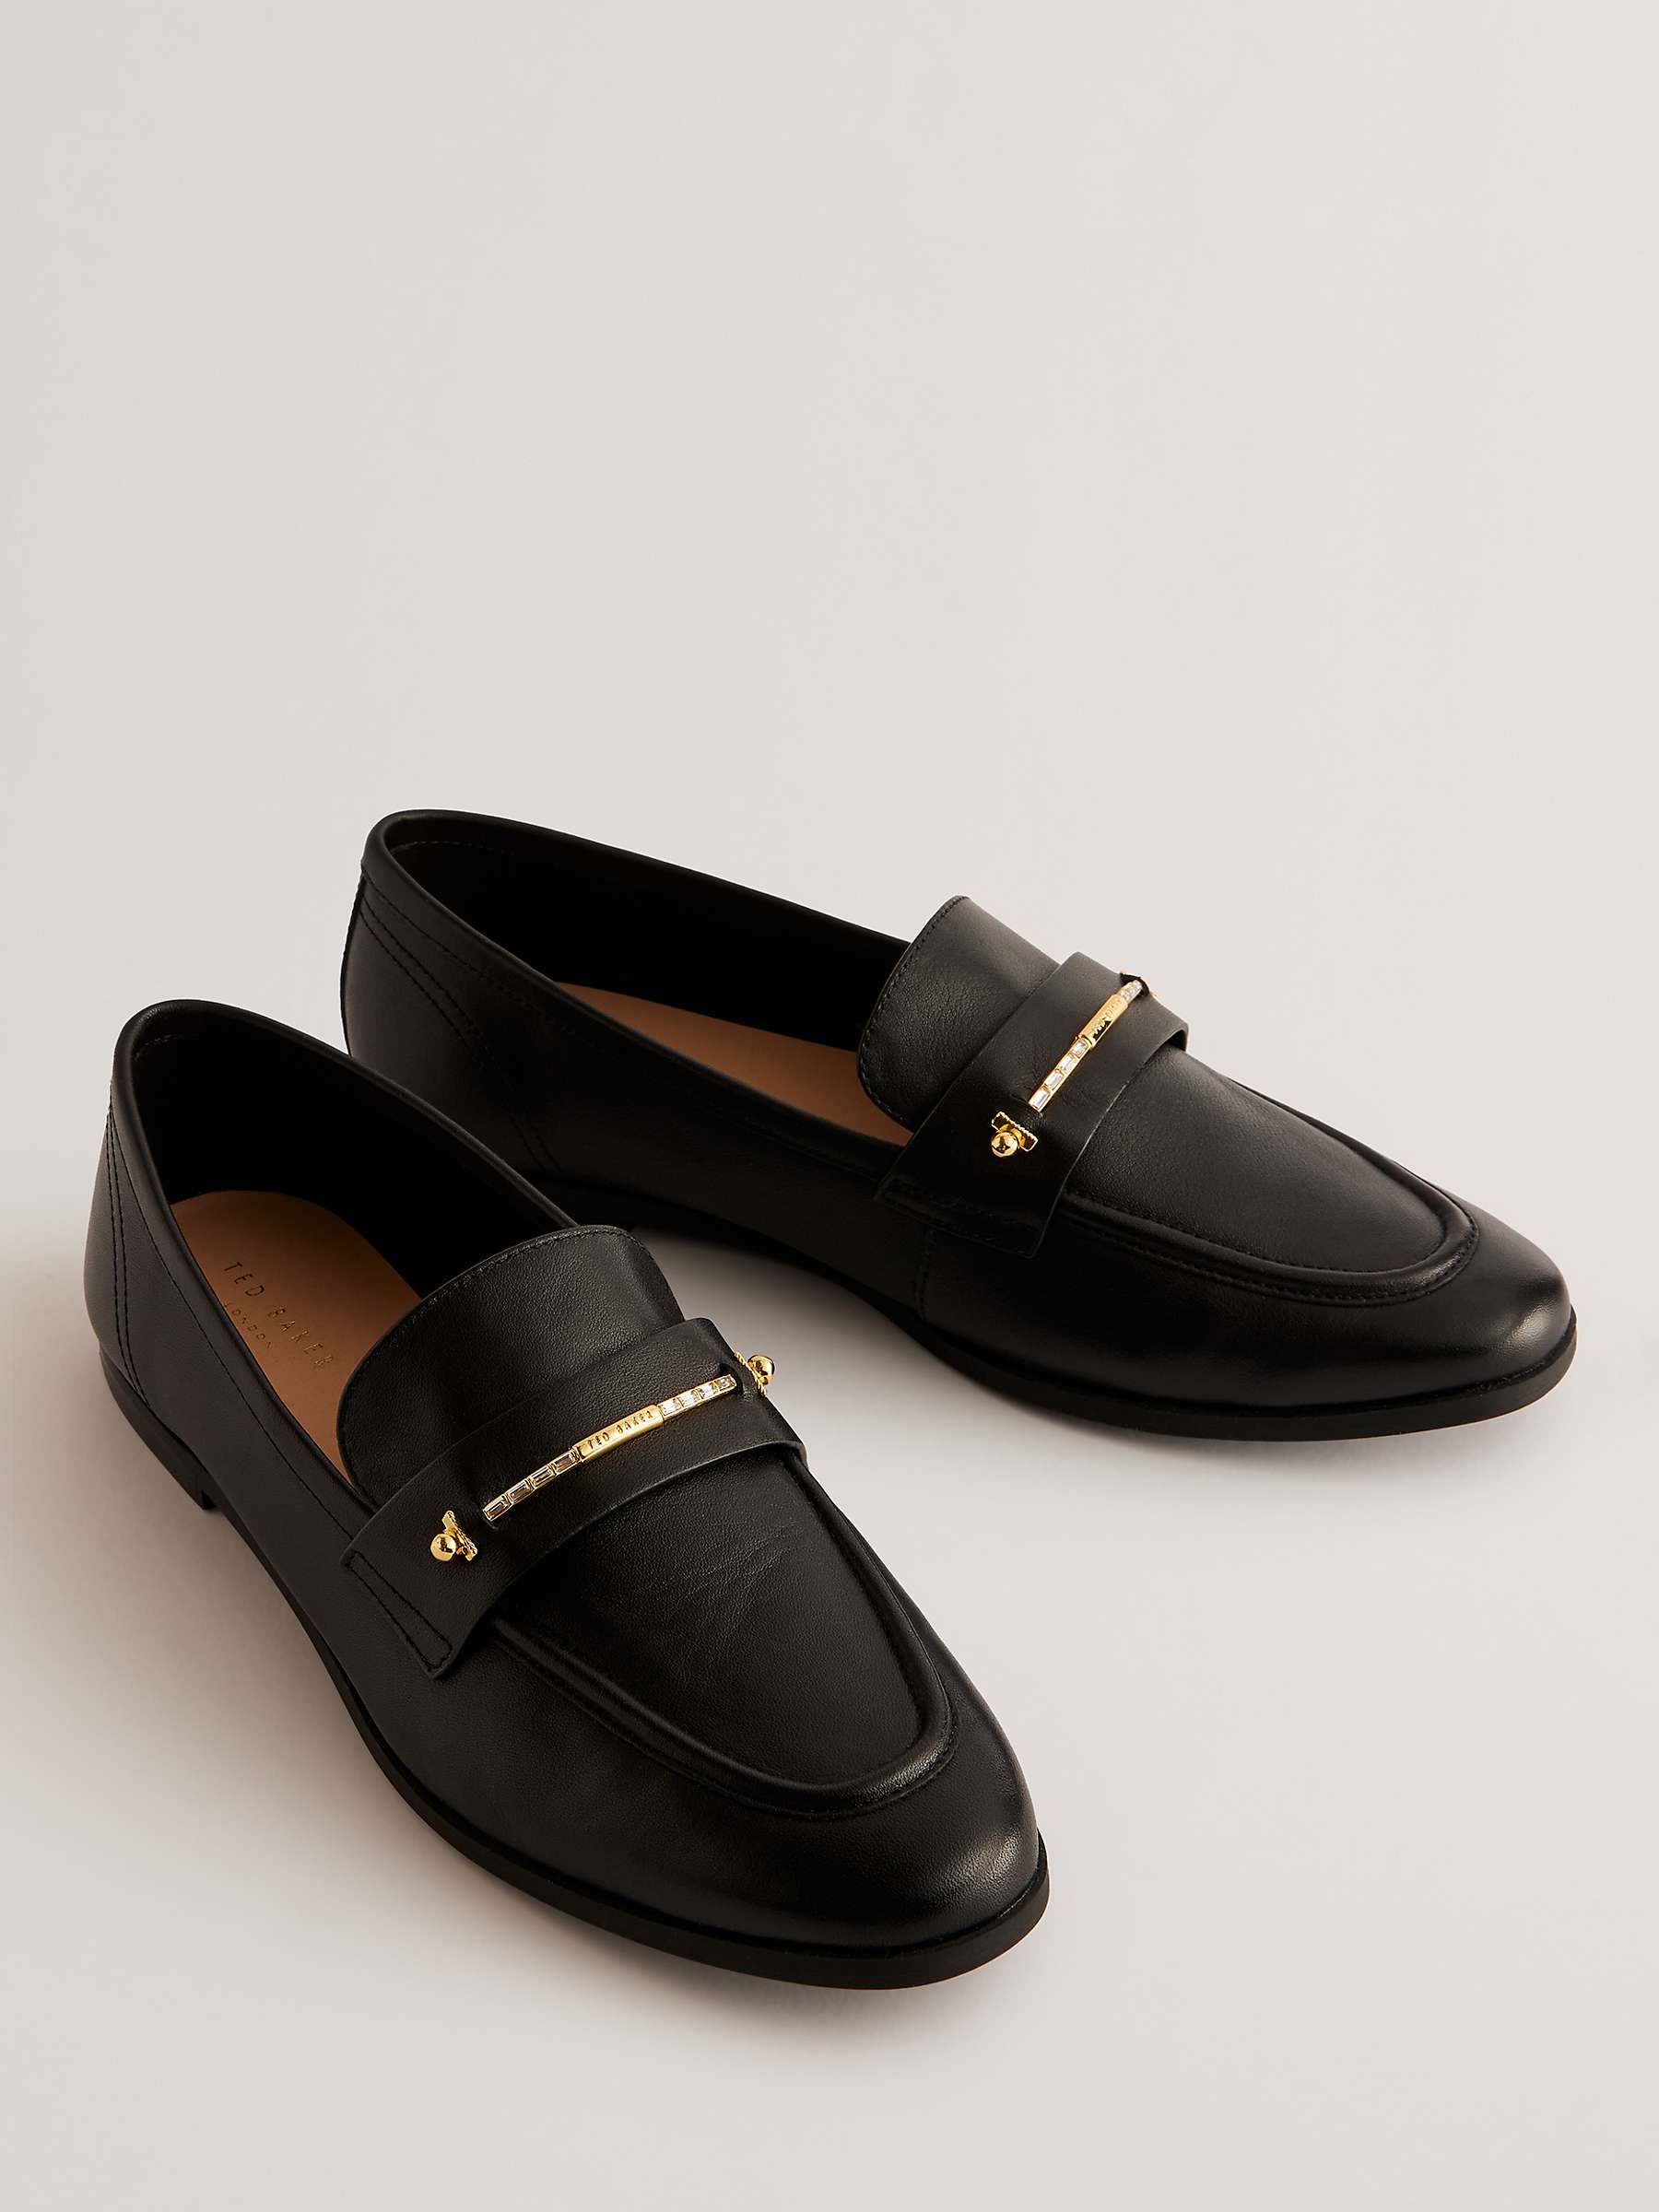 Buy Ted Baker Zzoee Flat Leather Loafers Online at johnlewis.com